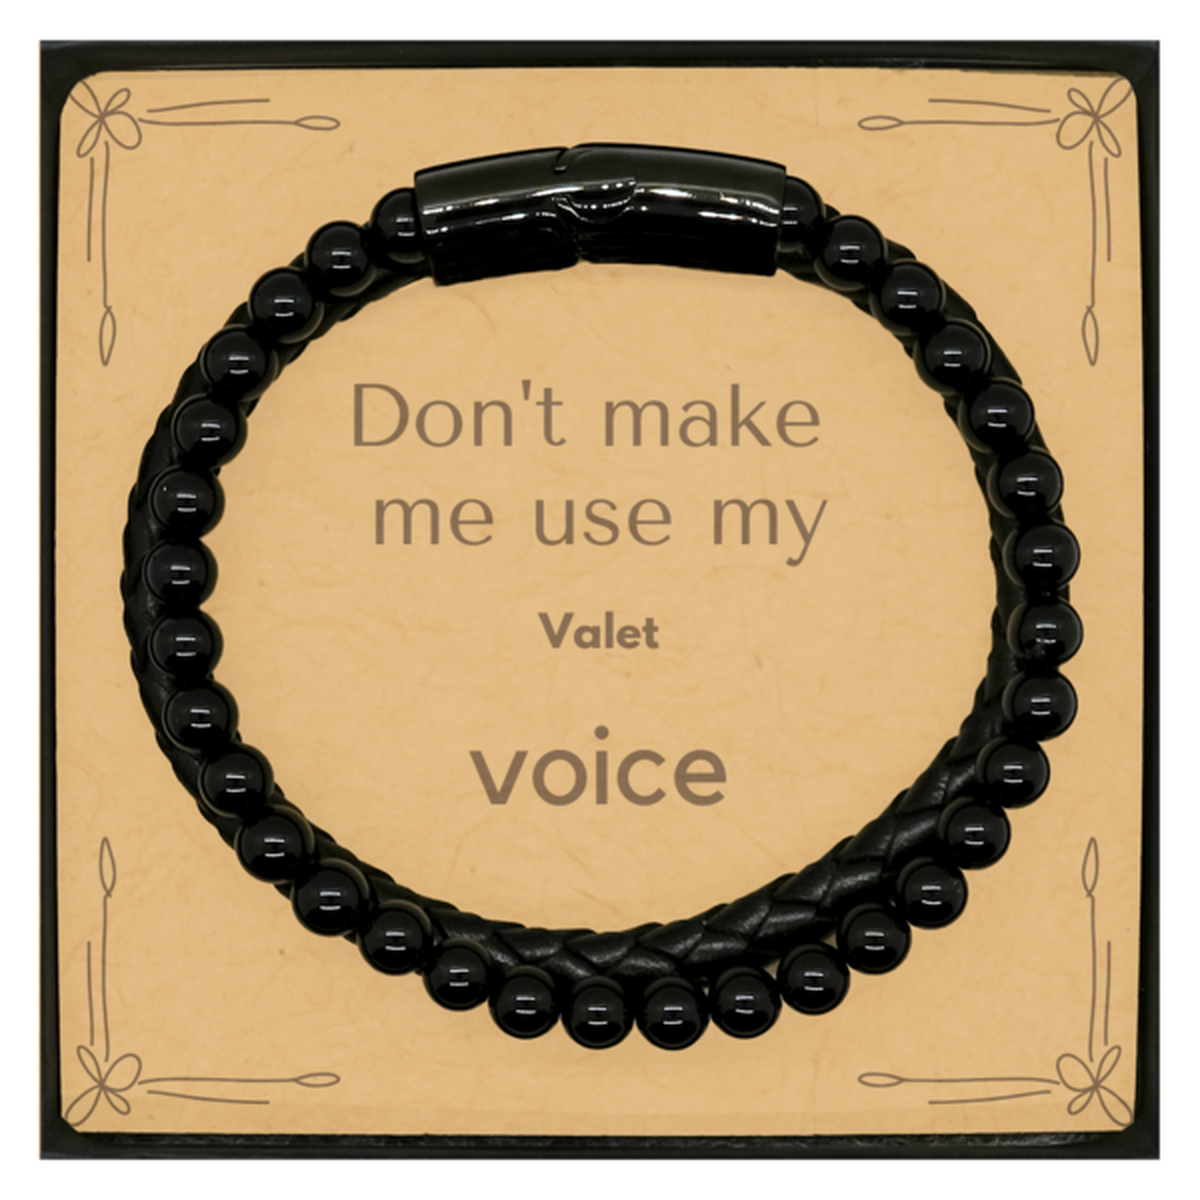 Don't make me use my Valet voice, Sarcasm Valet Card Gifts, Christmas Valet Stone Leather Bracelets Birthday Unique Gifts For Valet Coworkers, Men, Women, Colleague, Friends